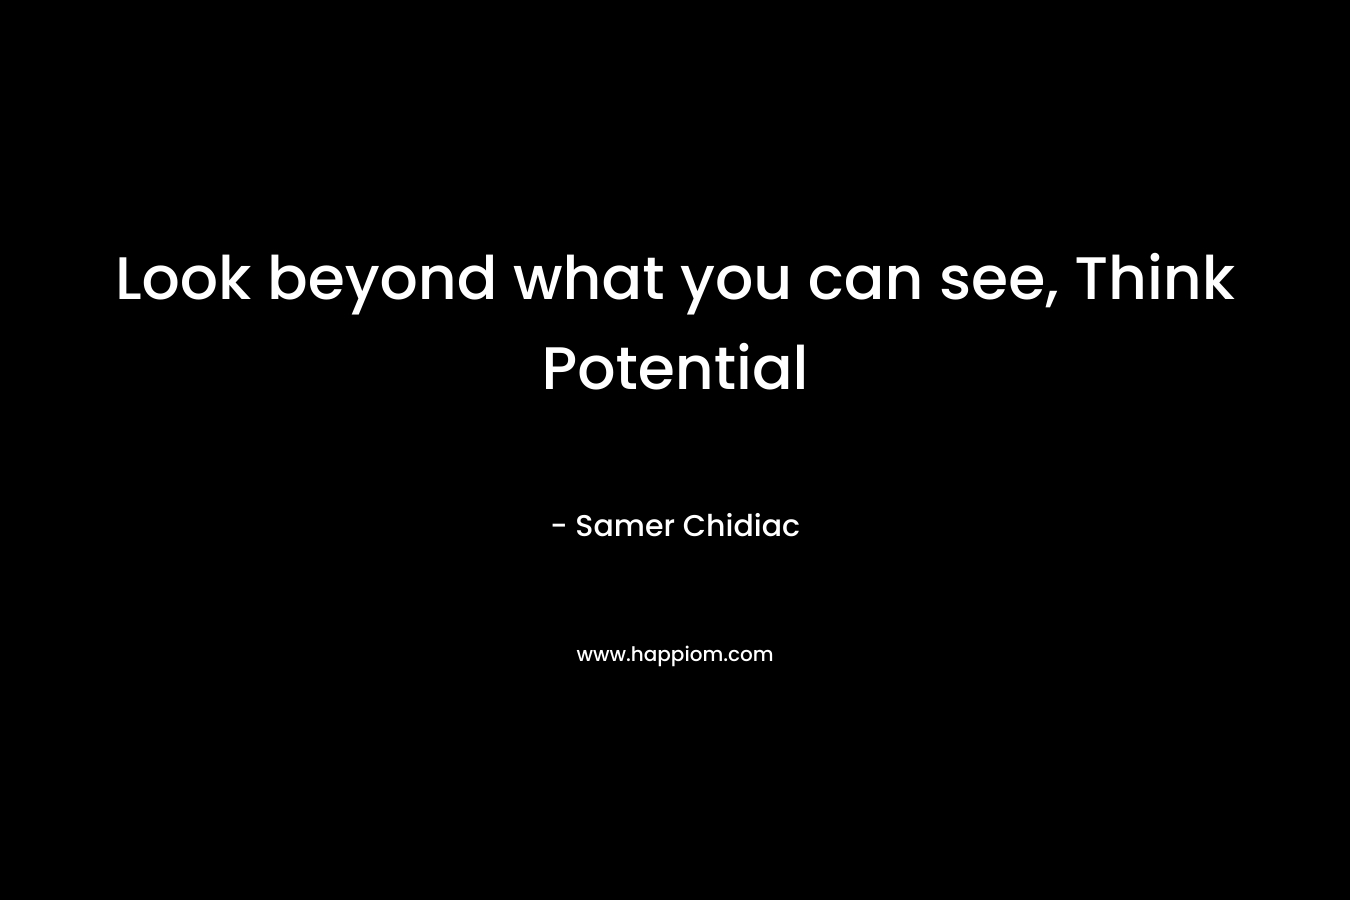 Look beyond what you can see, Think Potential